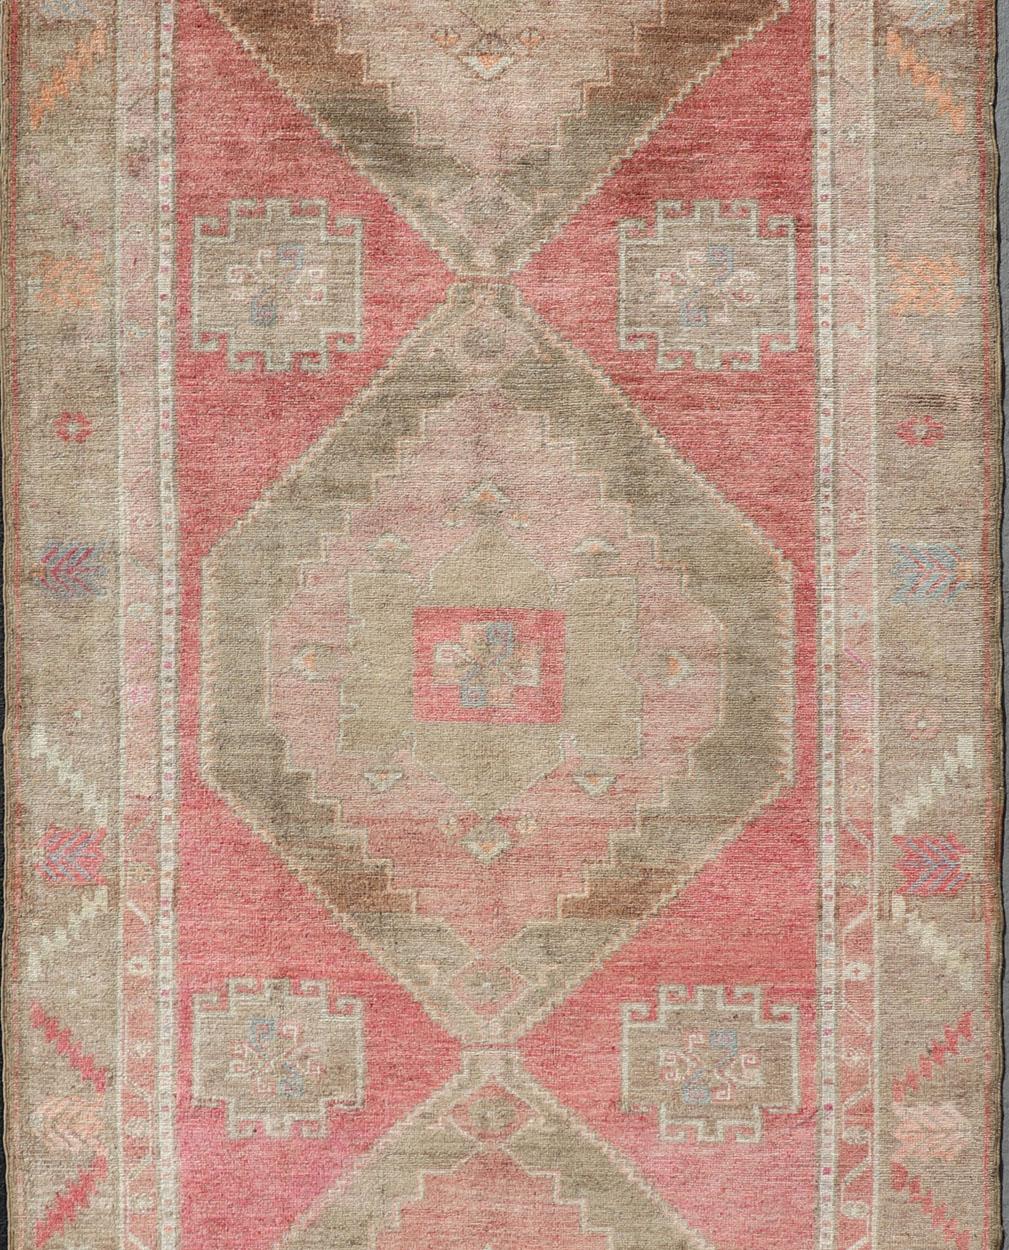 Vintage wide and long gallery runner from Turkey with geometric Medallion design in various tones of pink, coral, tan and variety of beautiful green colors, rug EN-179586, country of origin / type: Turkey / Kars, circa 1940

This beautiful vintage